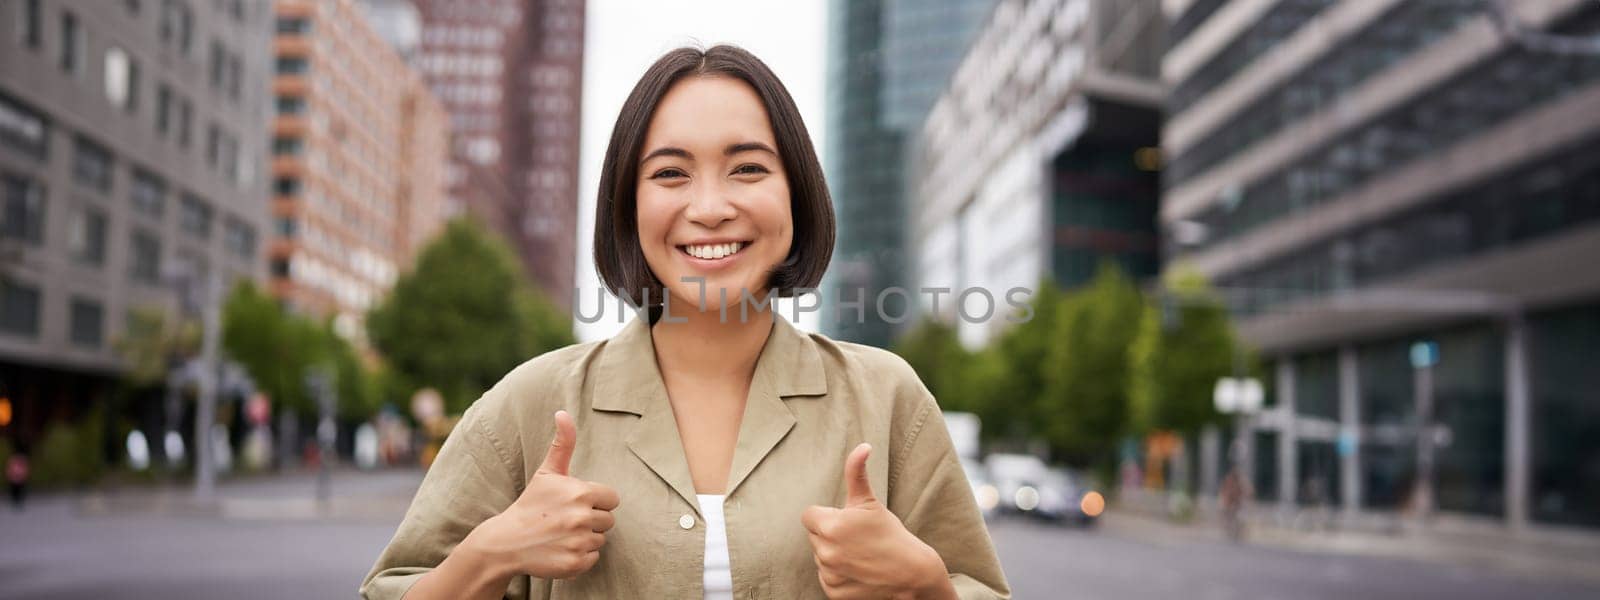 Enthusiastic asian woman , shows thumbs up in approval, looking upbeat, say yes, approves and agrees, stands on street.